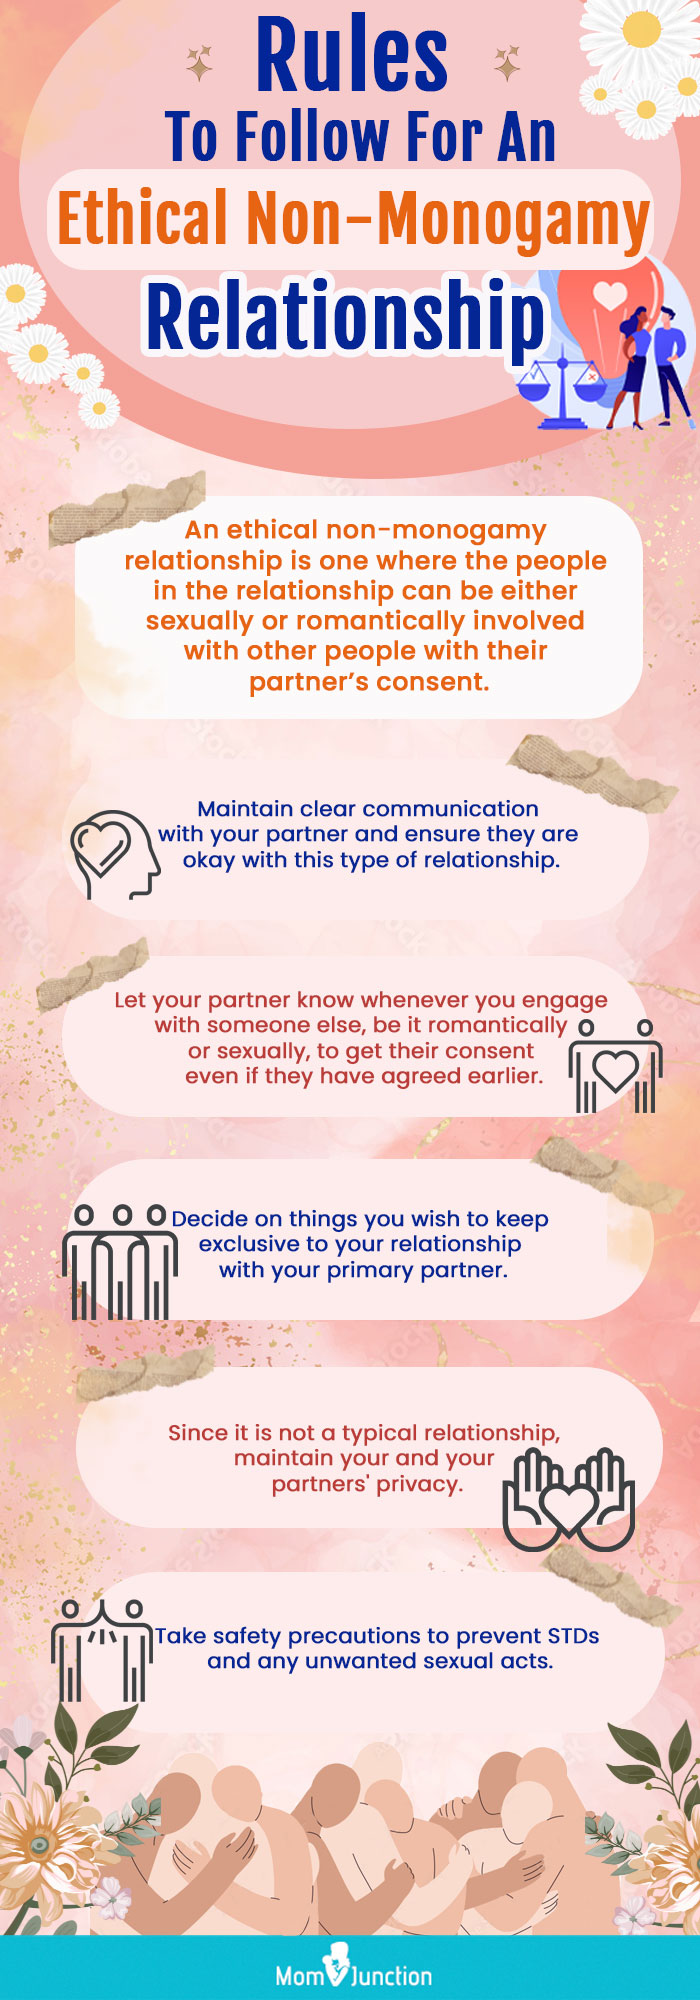 ethical non-monogamy rules [infographic]